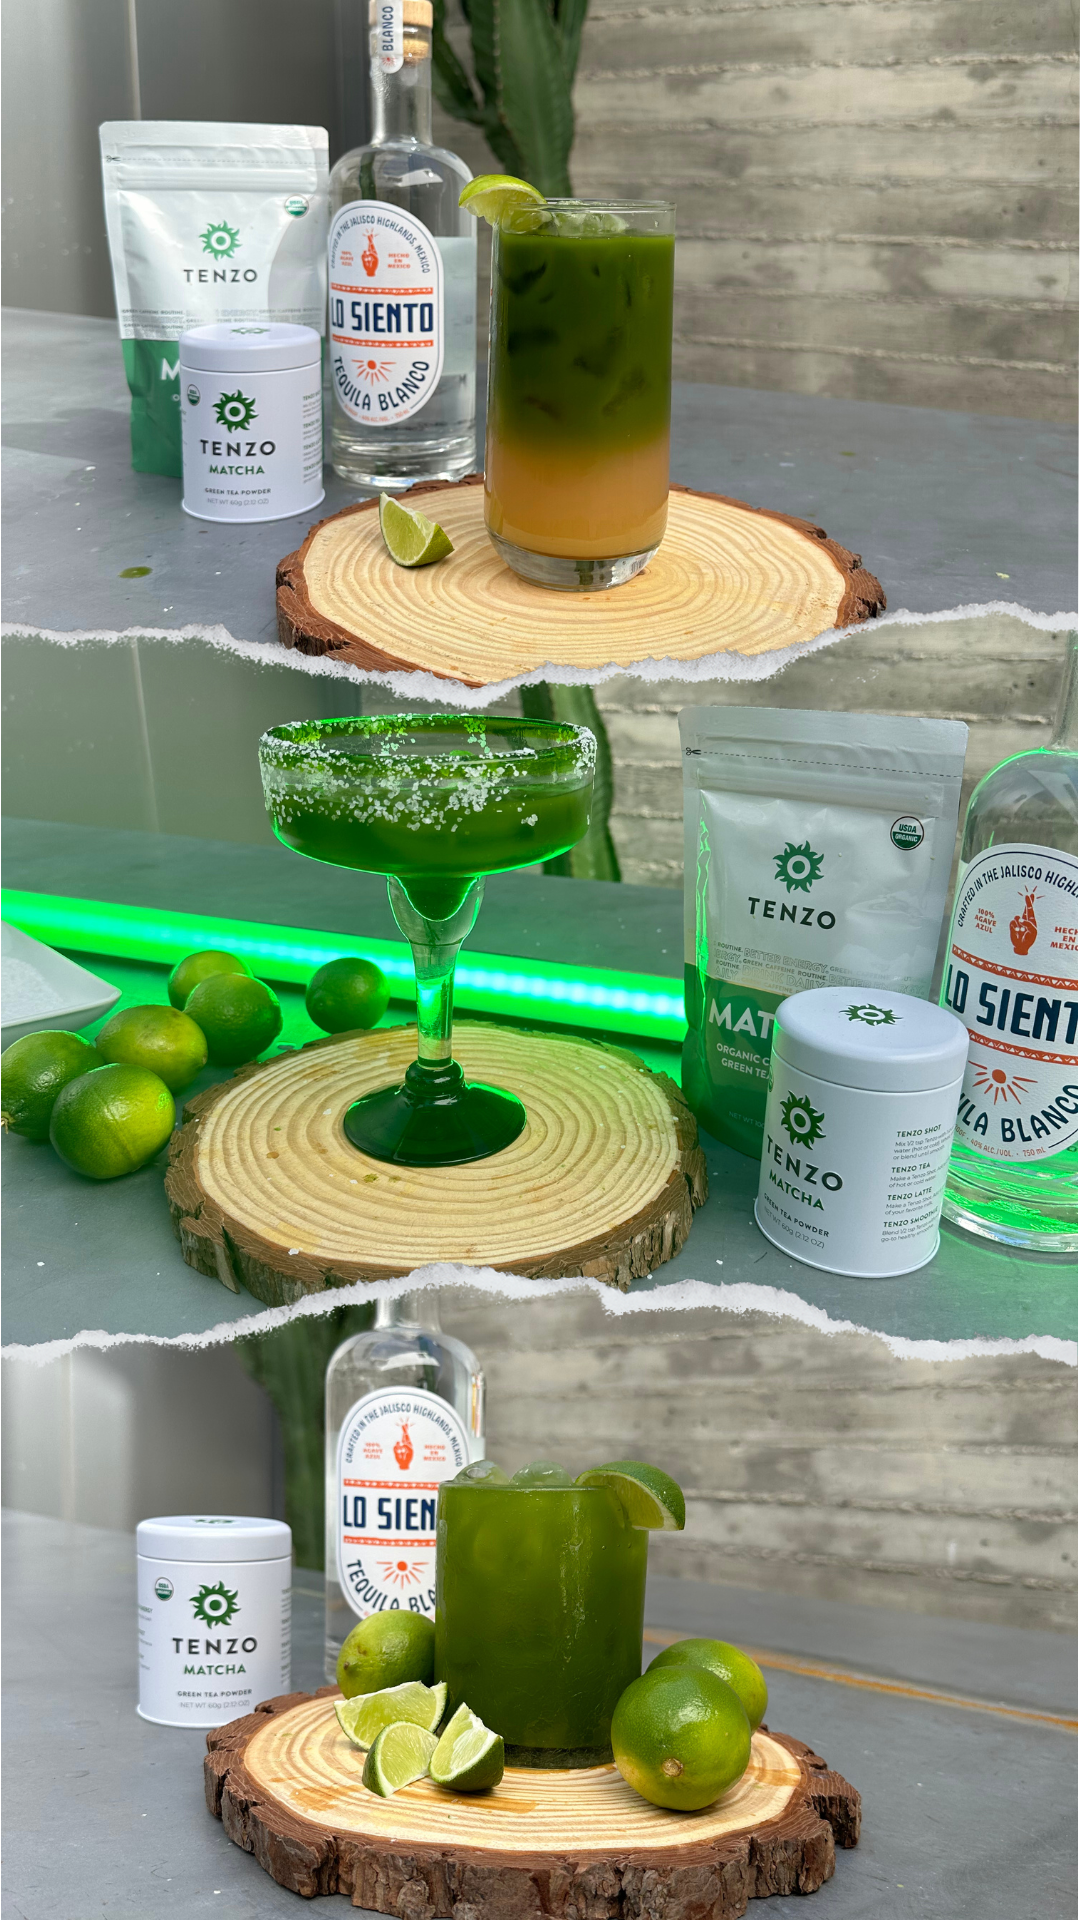 Tenzo Partners with Tequila Brand Lo Siento to Create Three Unique Cocktails for St. Patrick's Day Celebrations